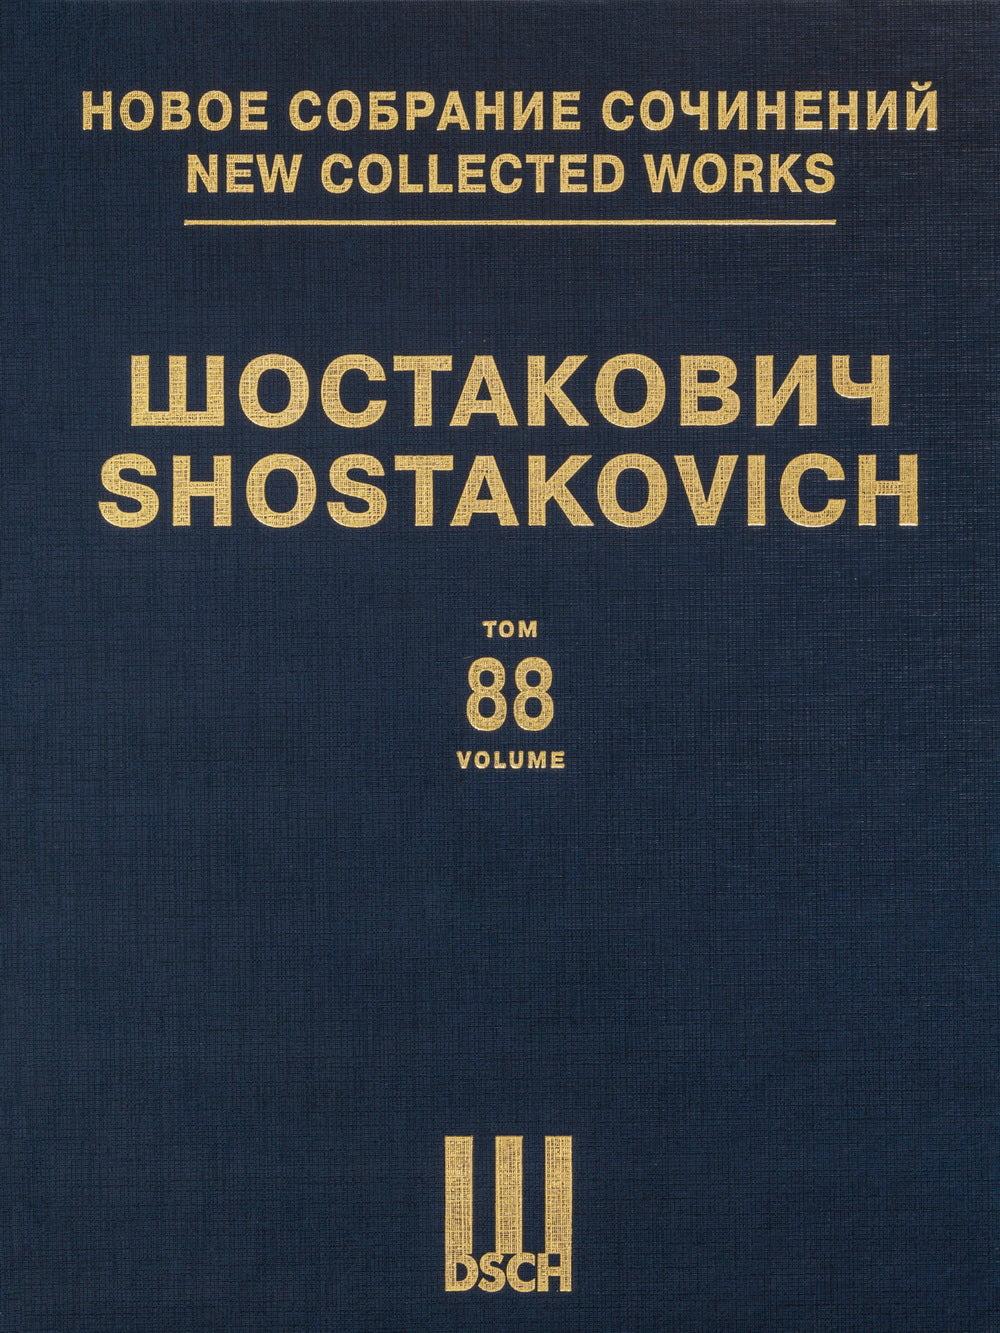 Shostakovich: Six Romances on Verses by W. Raleigh, R. Burns and W. Shakespeare.